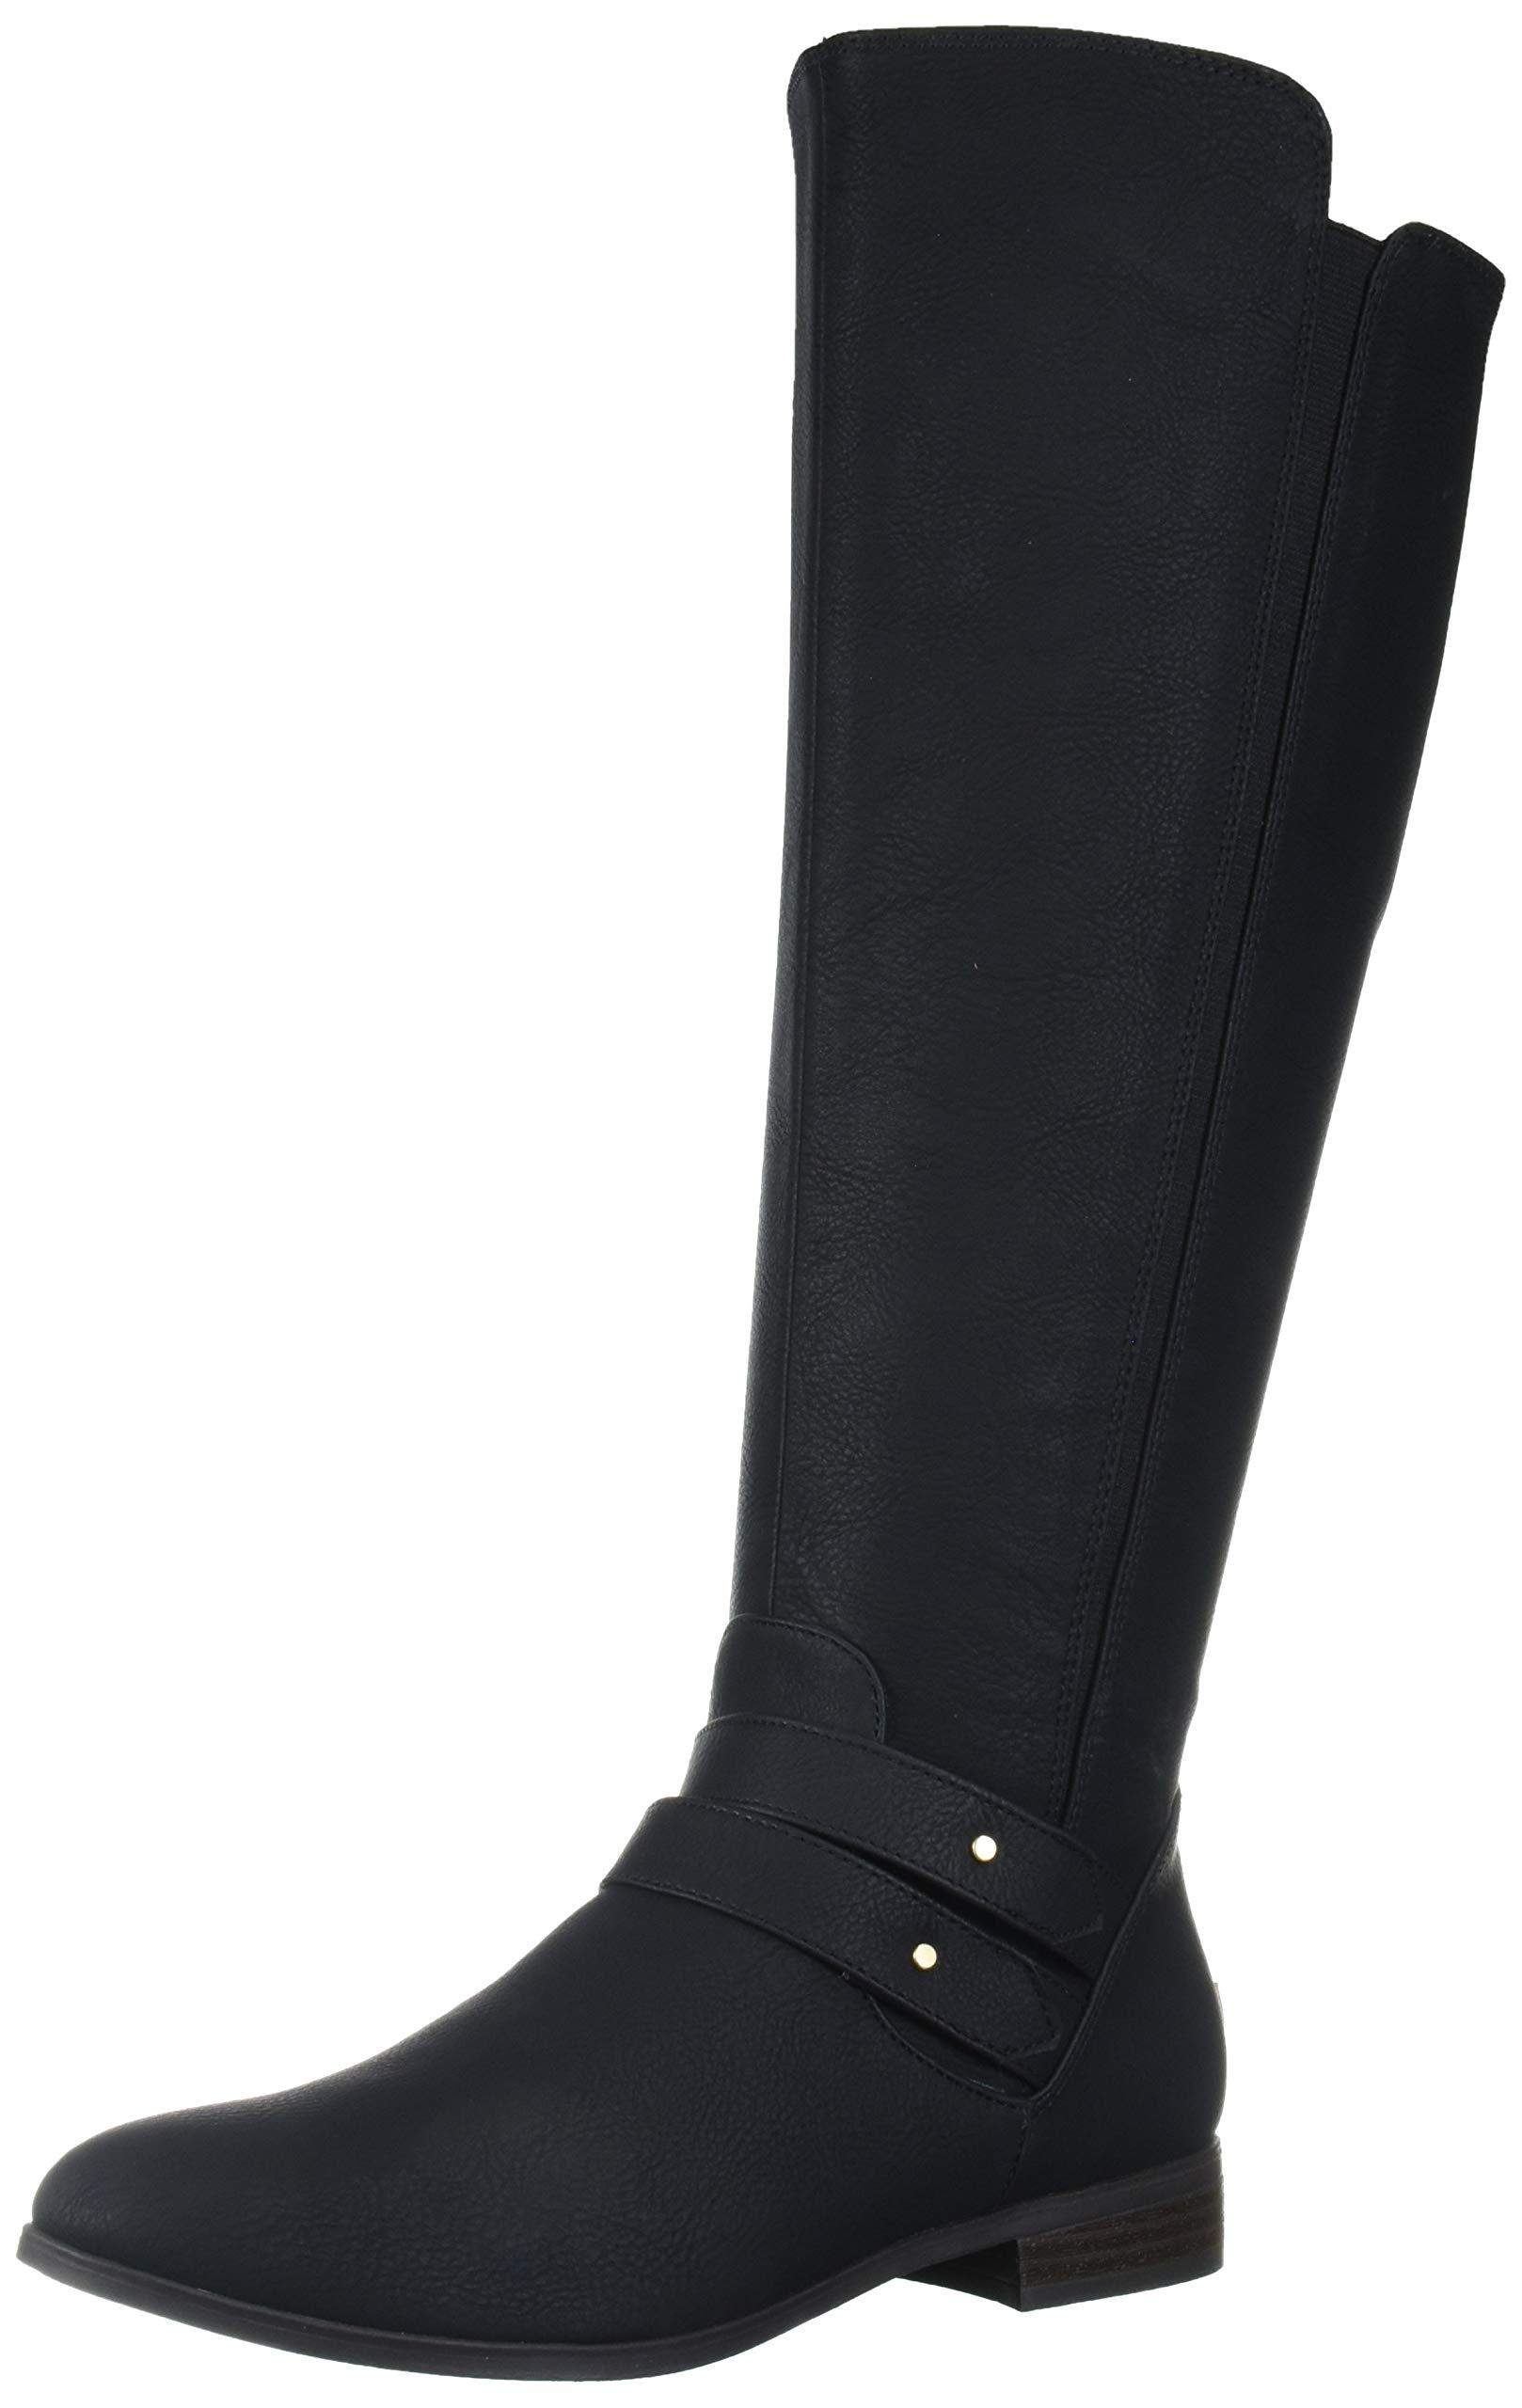 Dr. Scholls Reach For It Riding Boots in Black | Lyst